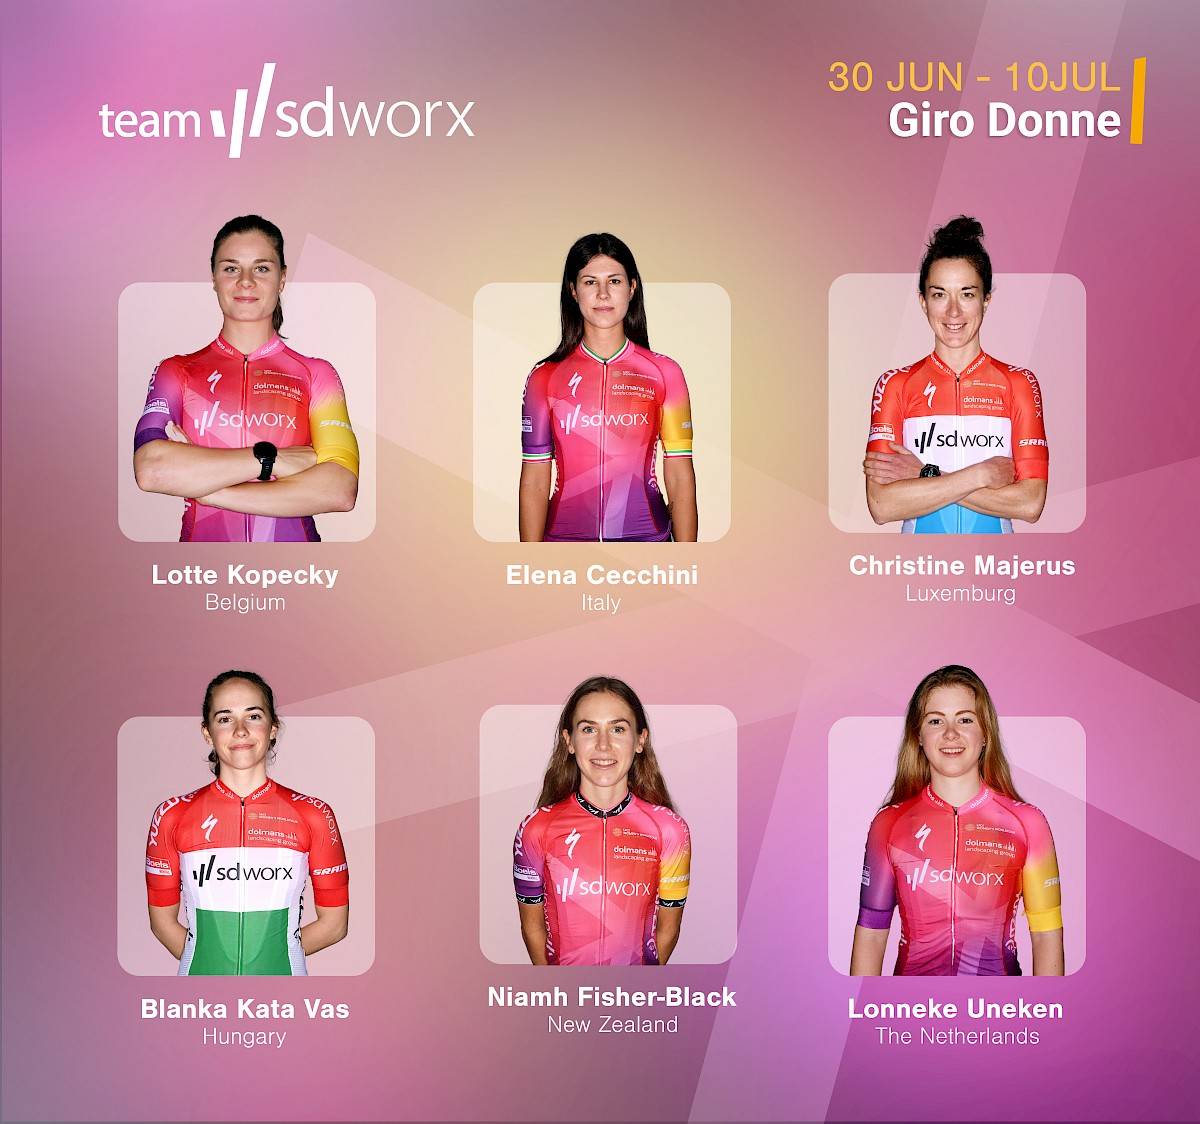 Team SD Worx goes to Giro Donne for stage wins